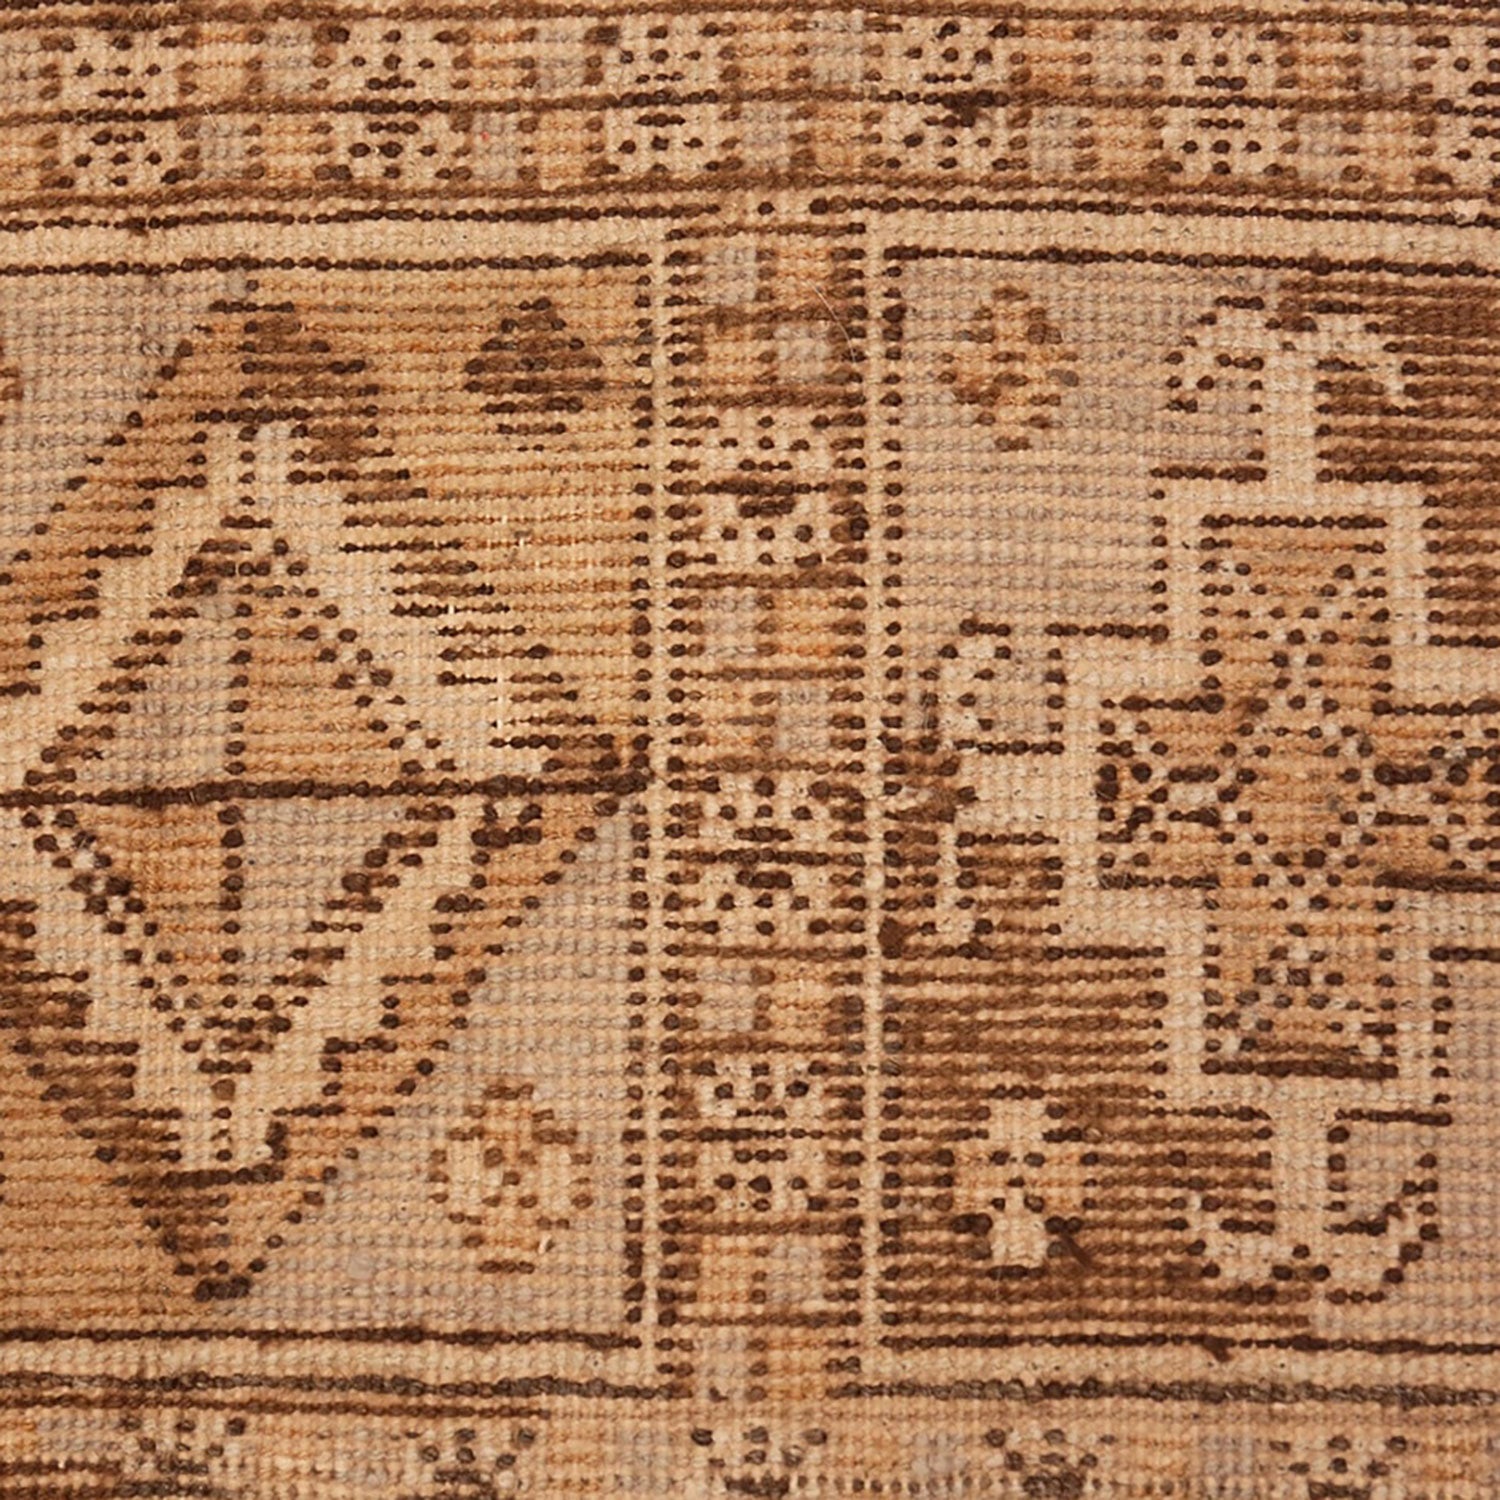 Intricate woven textile with geometric pattern and symbolic Star of David motif.